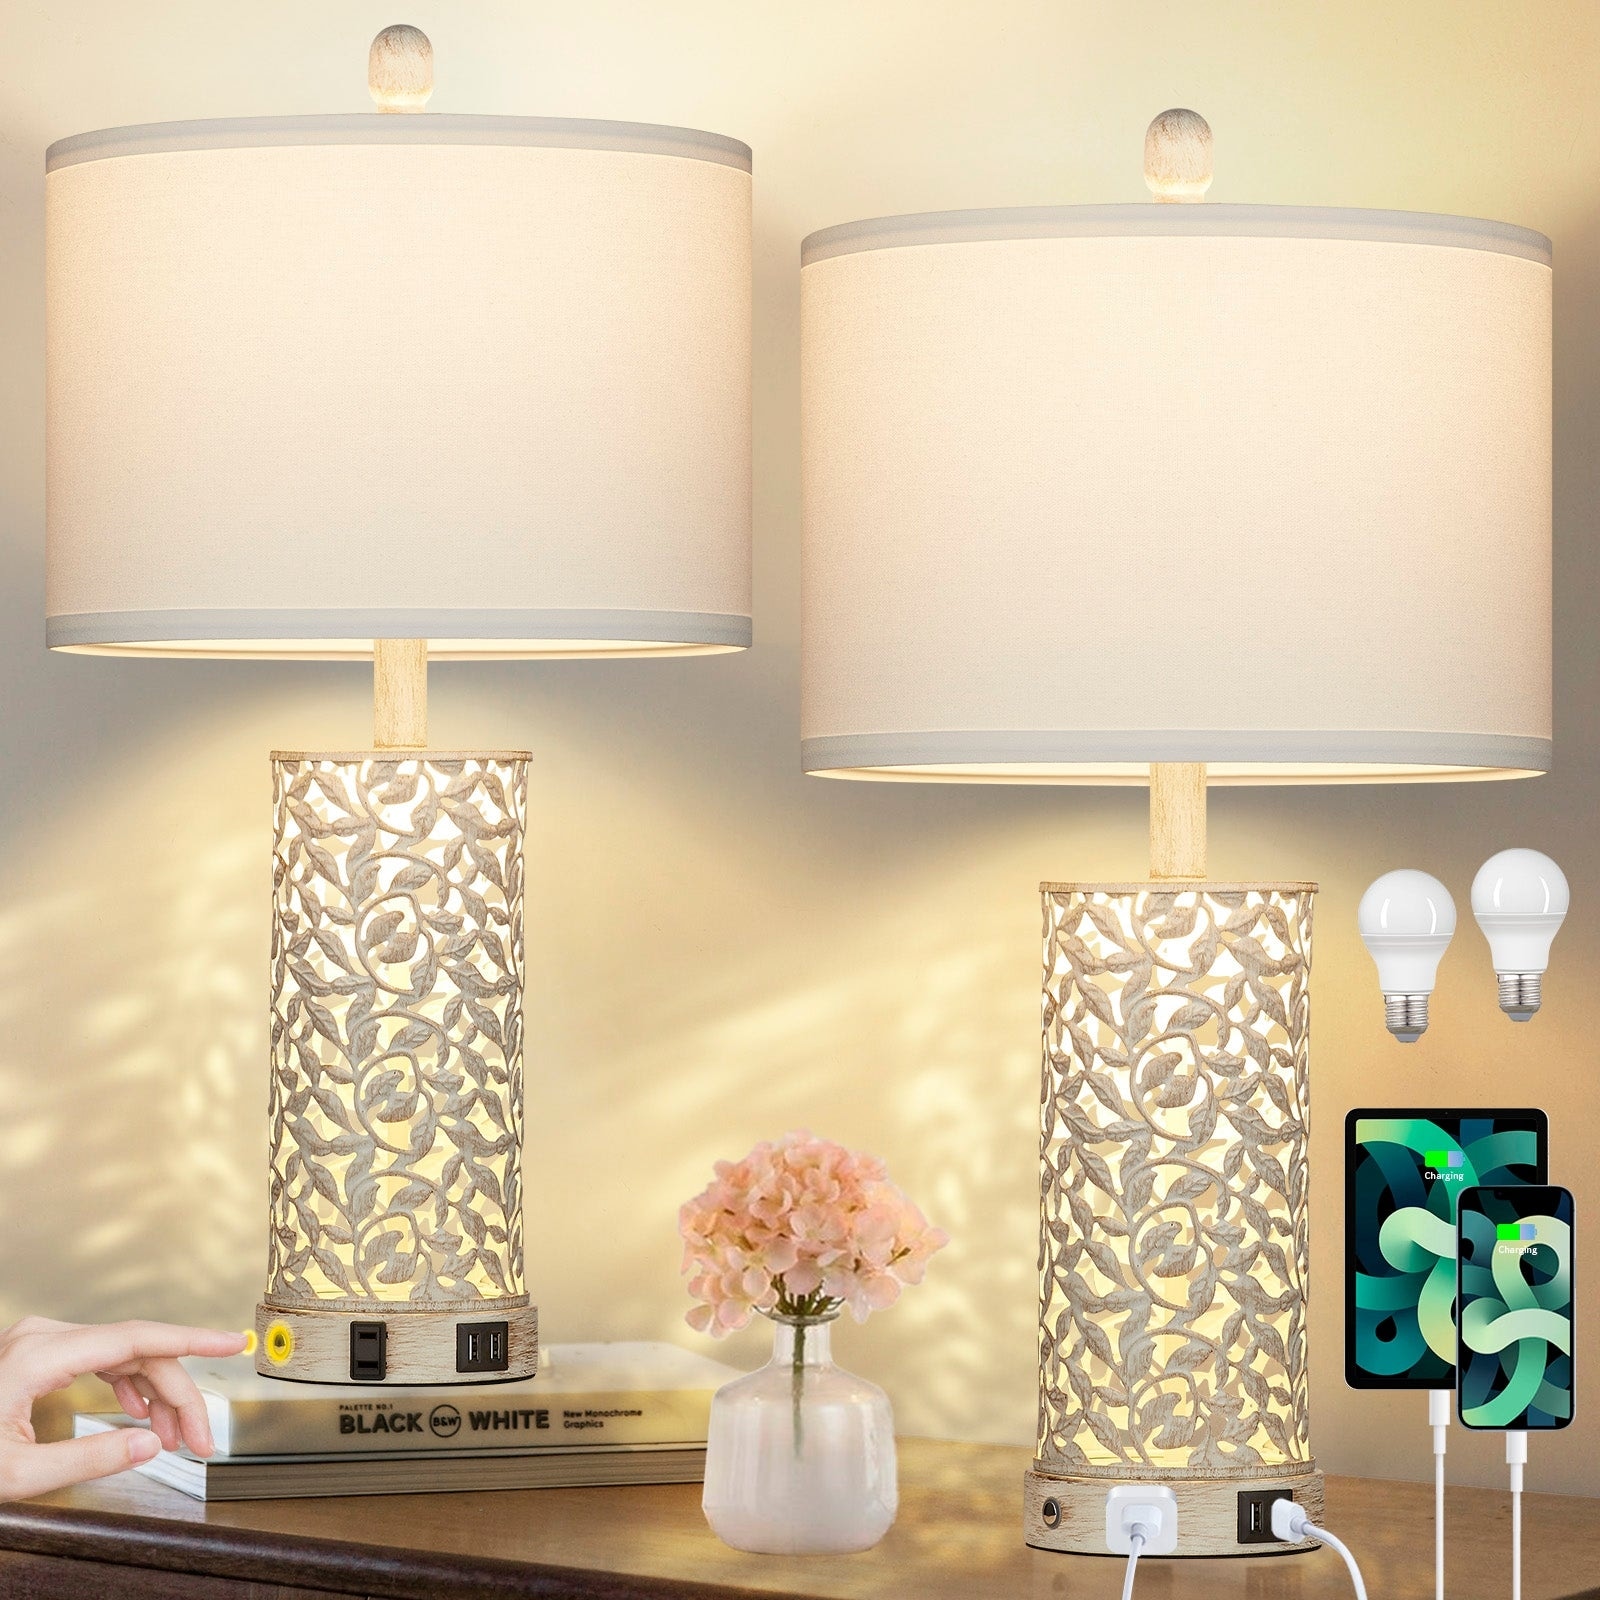 Table Lamps Nightlight 2in1 White with Gold Metal USB Ports AC Outlet Touch Switch(Set of 2)